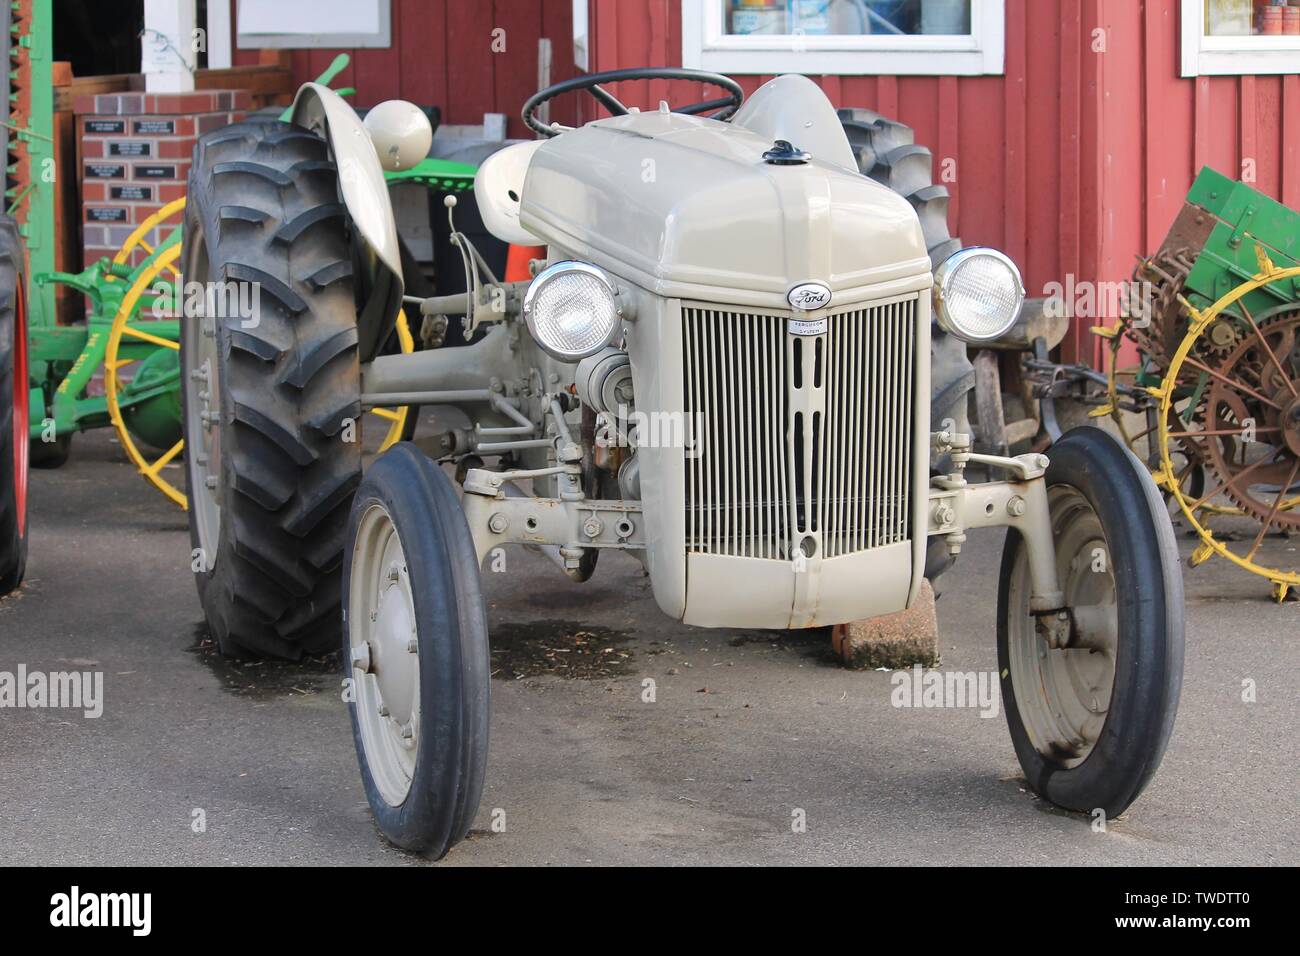 Restored classic antique Ford farm tractor displayed at a Pacific Northwest U.S. county fair with other vintage farm machinery on Aug. 30, 2015. Stock Photo